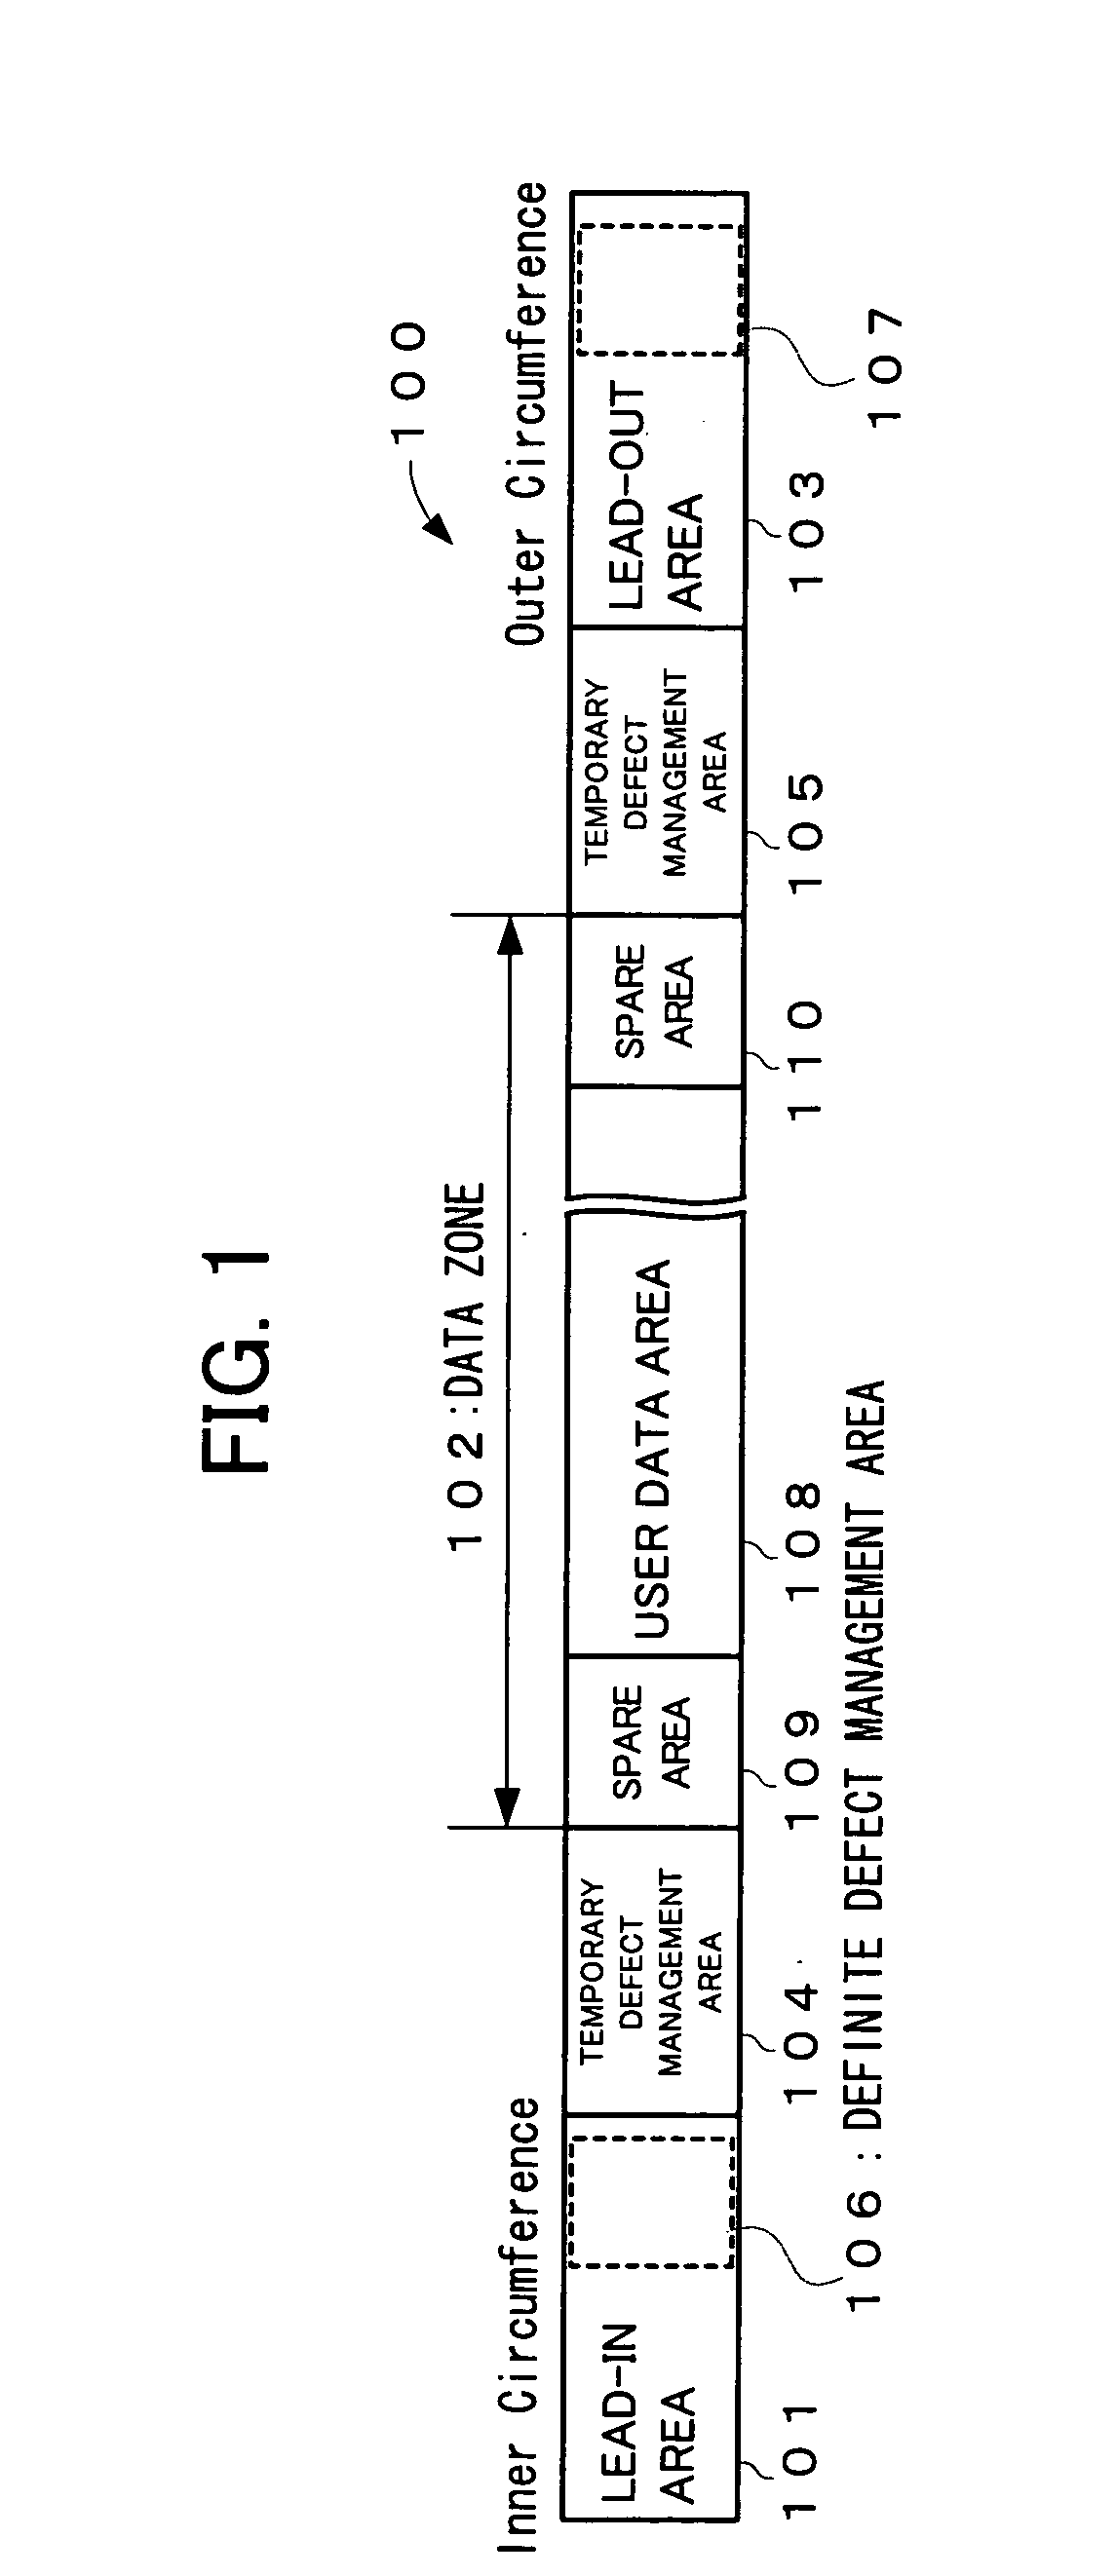 Information recording medium, recording apparatus and method for the same, reproducing apparatus and method for the same, computer program product for record or reproduction control, and data structure including control signal